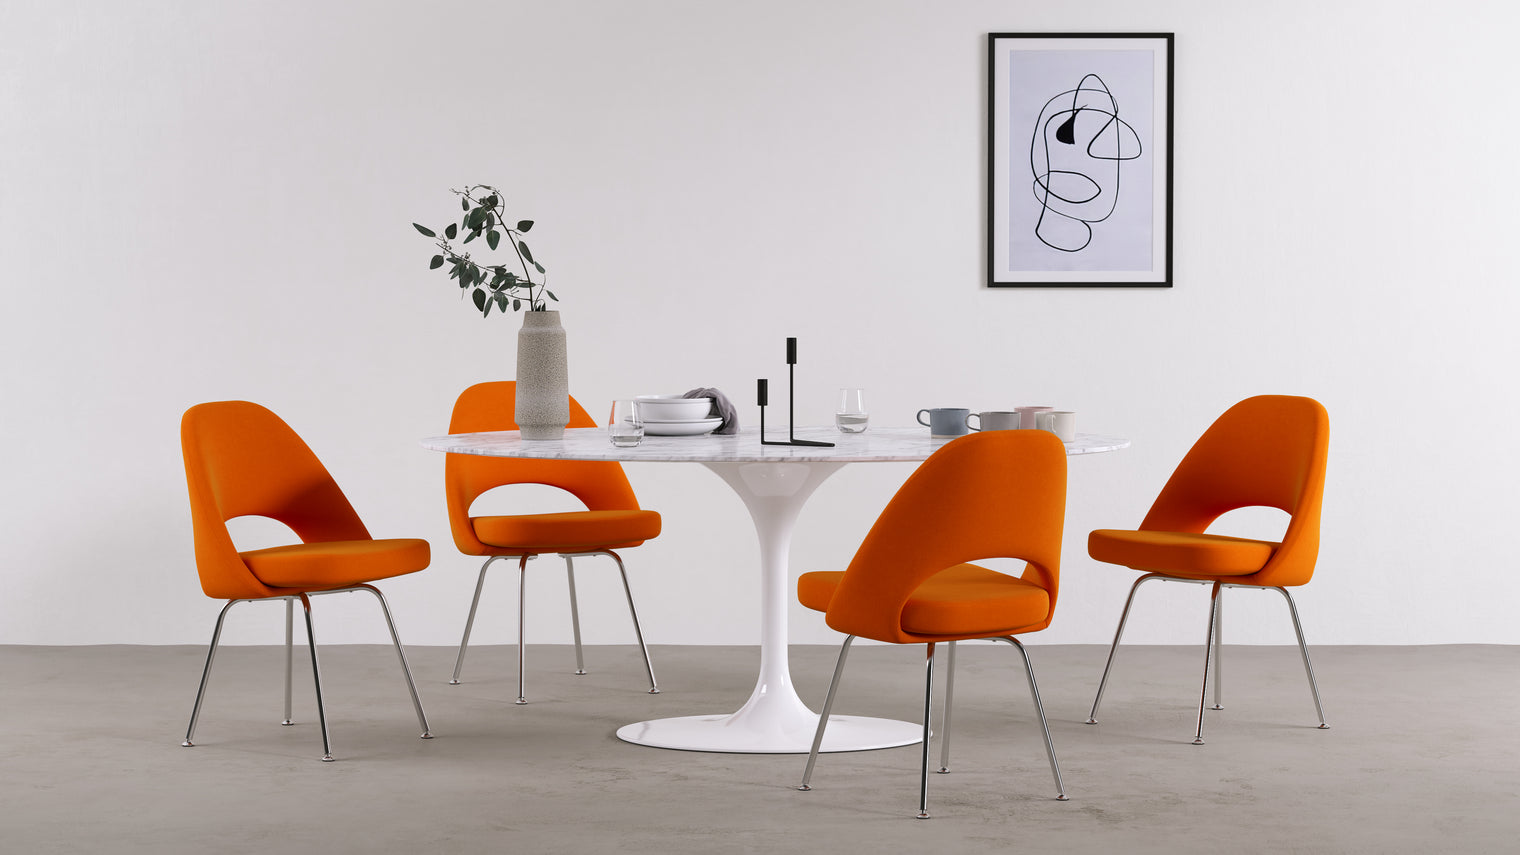 Executive Style - Executive Style Armless Dining Chair, Orange Wool